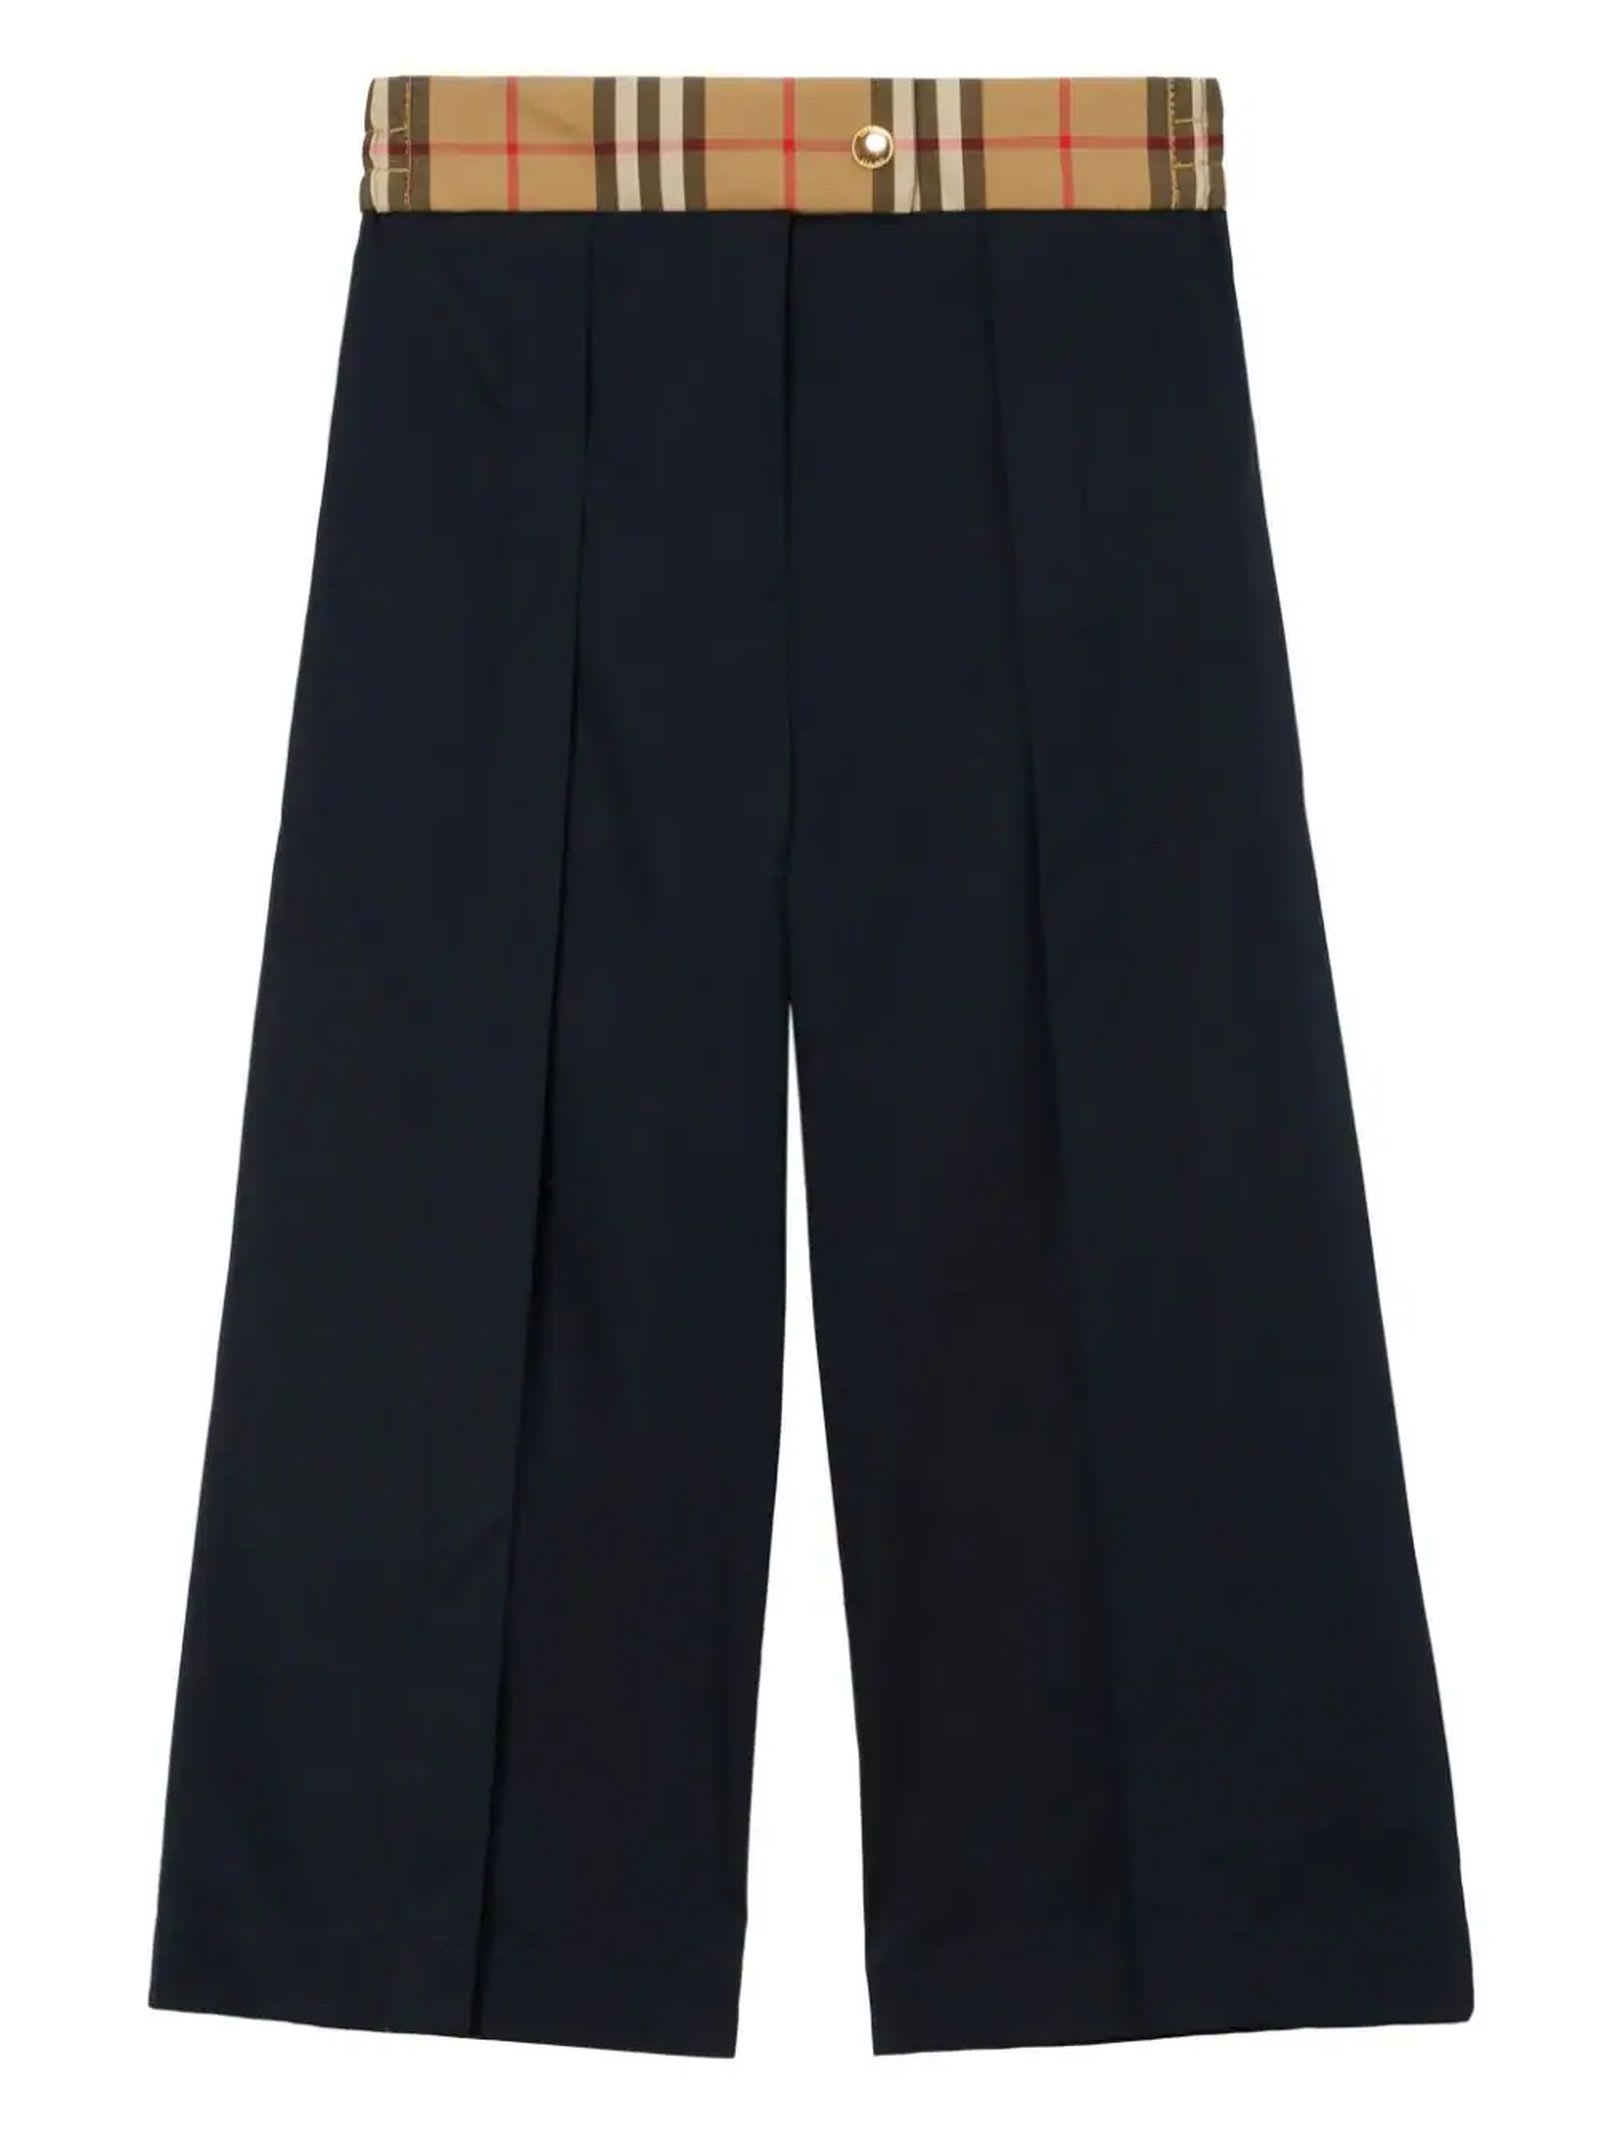 BURBERRY NAVY BLUE COTTON TROUSERS